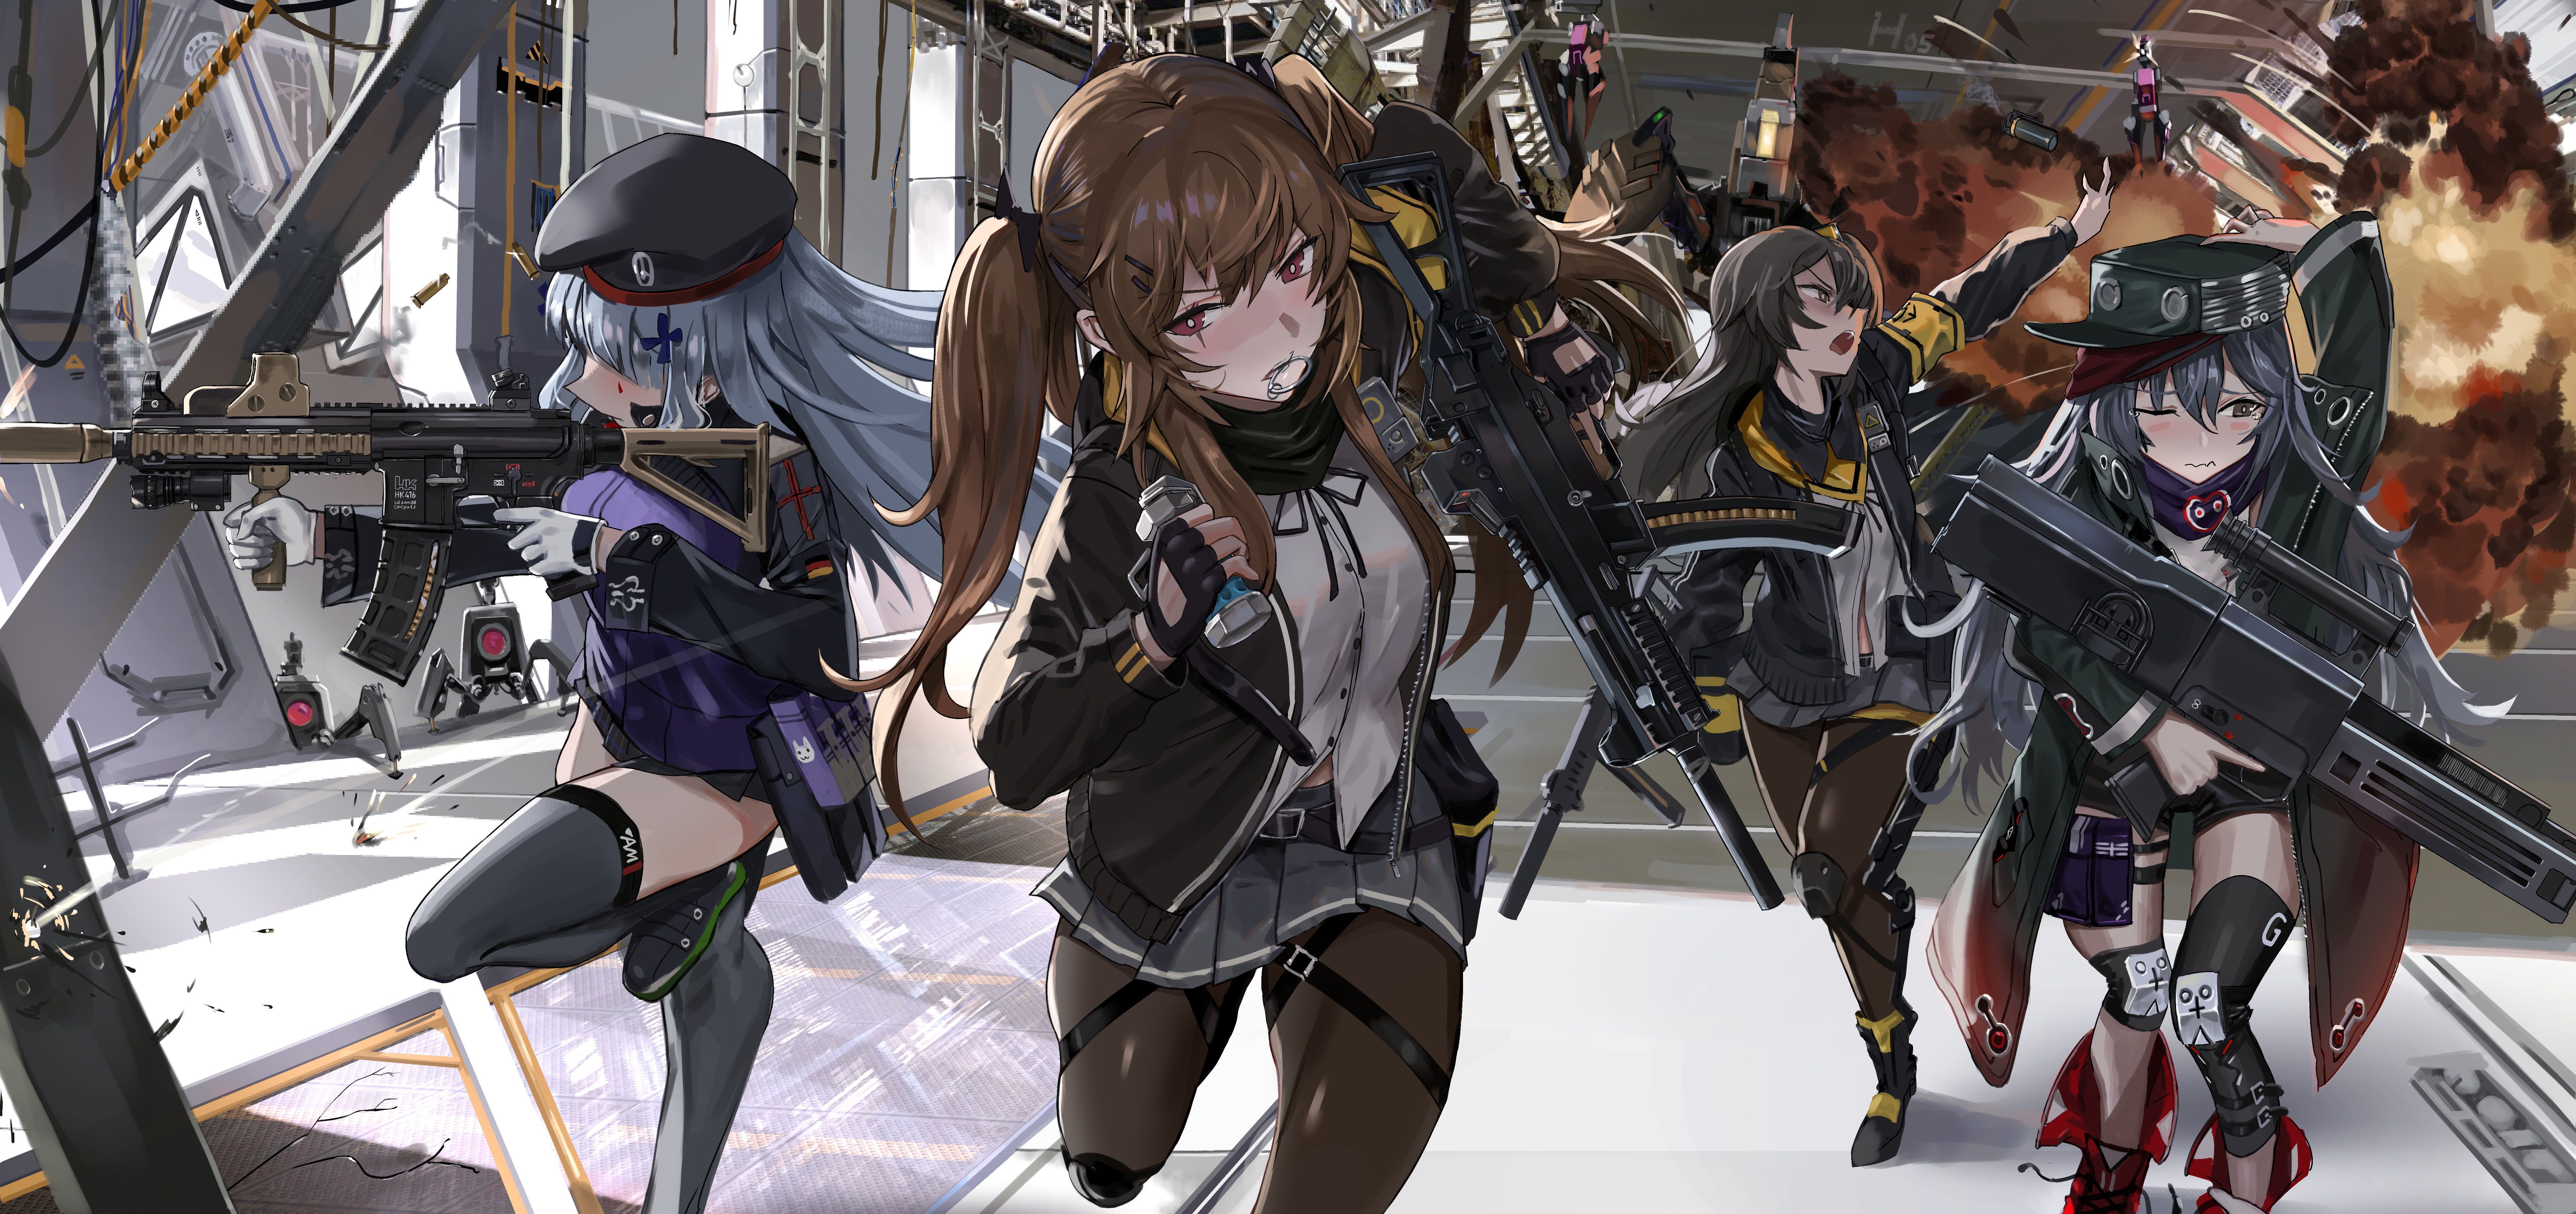 group of girls anime character #explosion girls with guns black